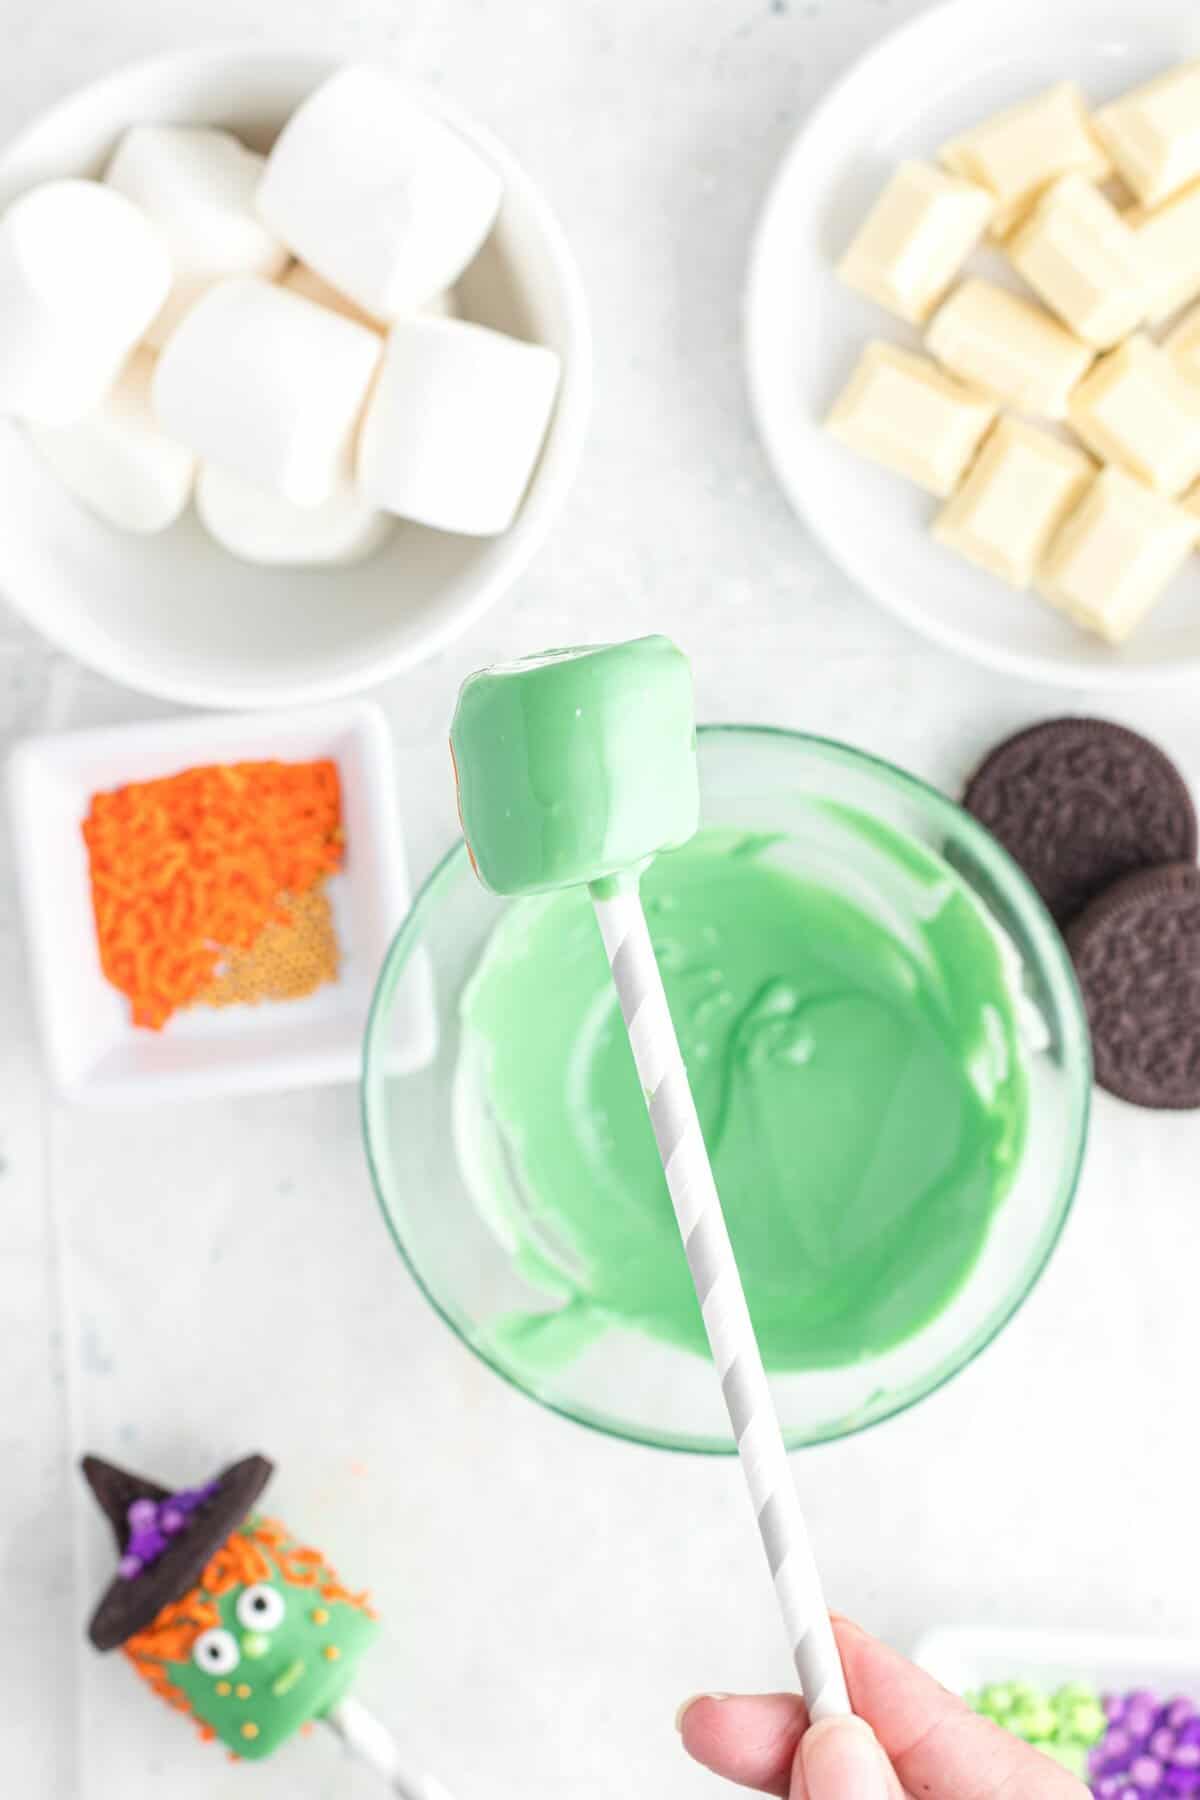 Dipping the marshmallow pop into the green melting chocolate bowl. 